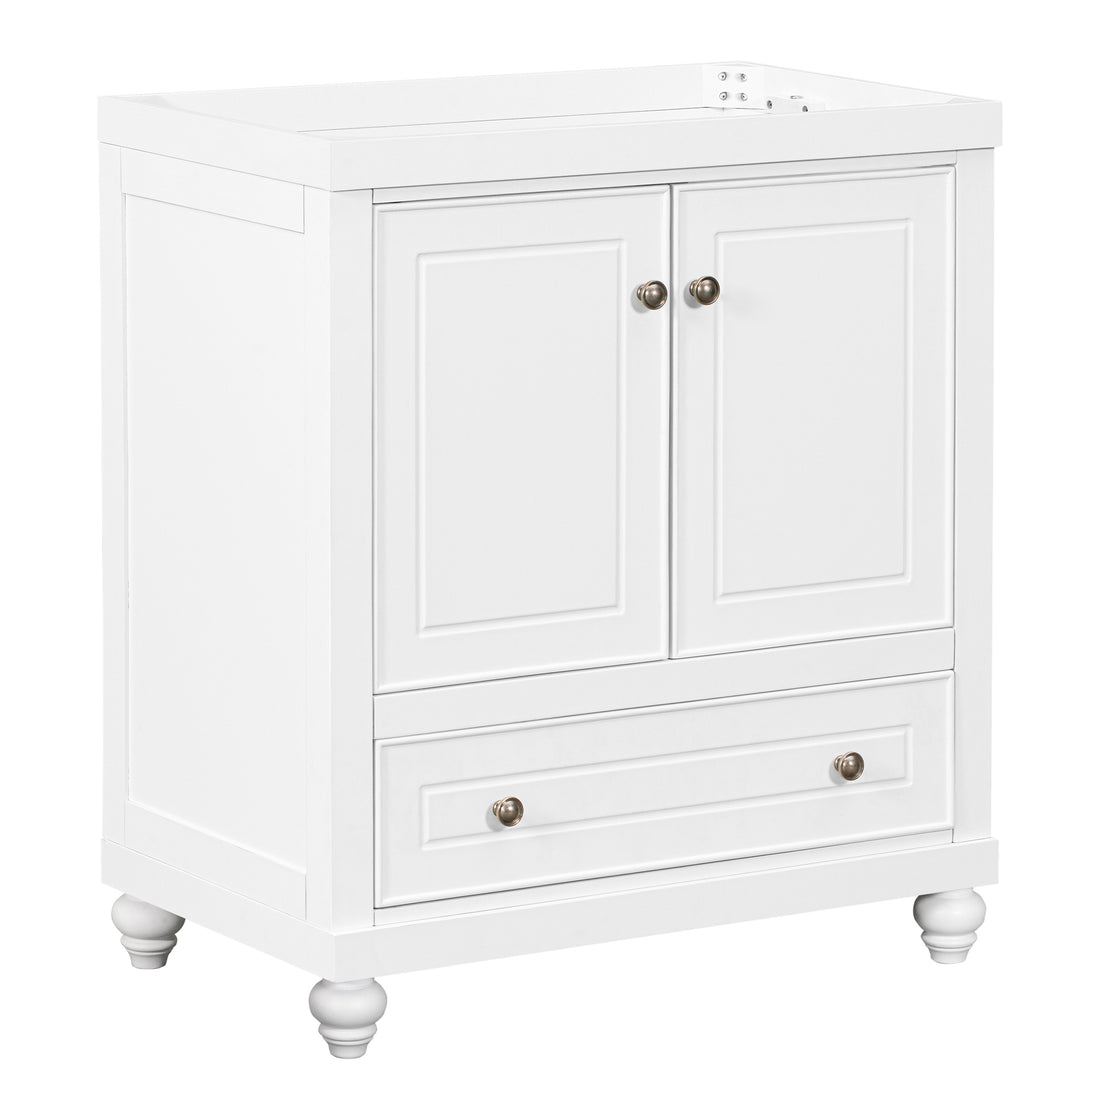 30" Bathroom Vanity without Sink, Base Only, Cabinet white-solid wood+mdf